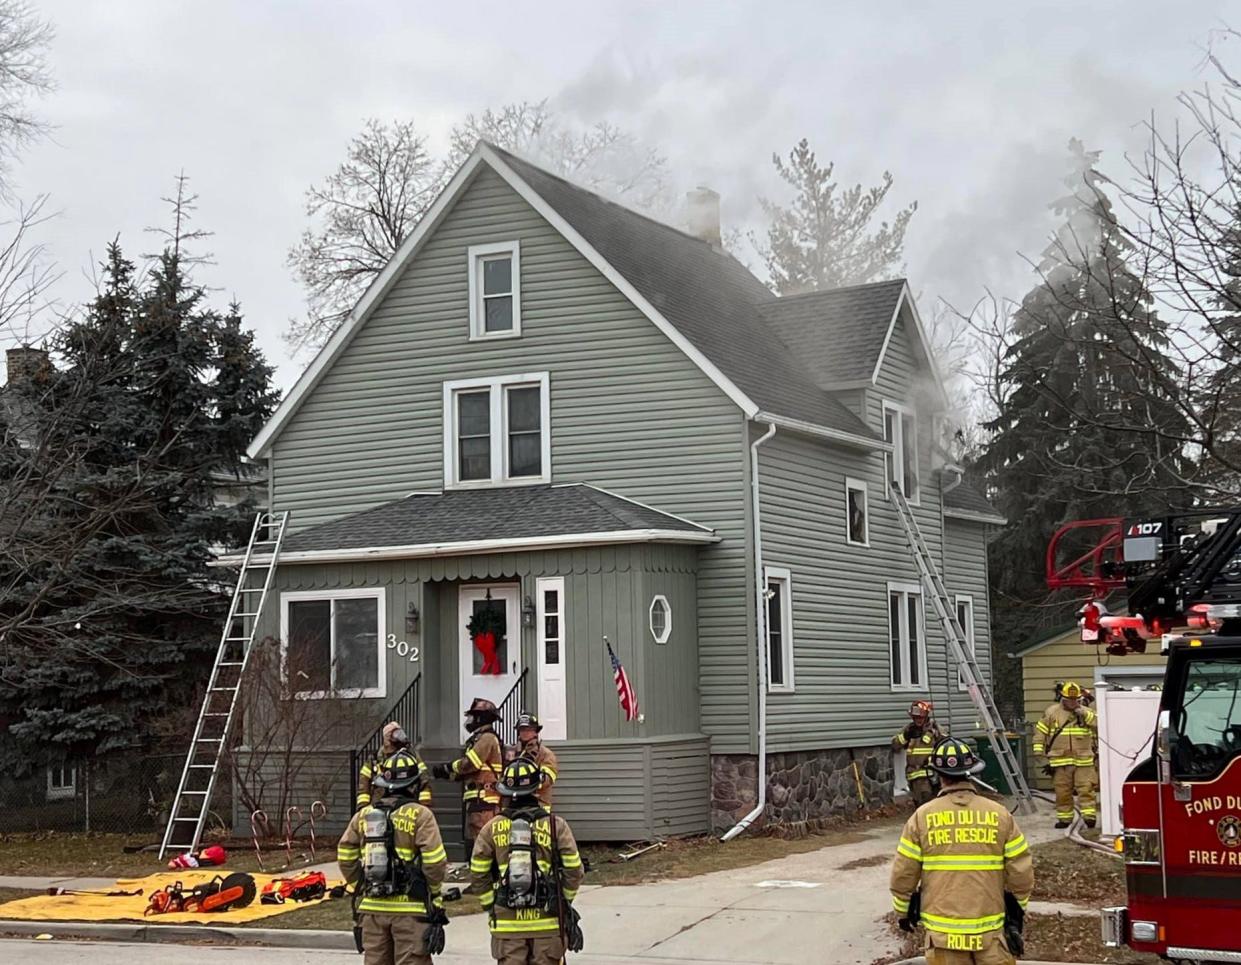 A 40-year-old Fond du Lac man has been arrested in connection with a house fire Tuesday  at 302 N. Macy St. that caused extensive damage to the home.